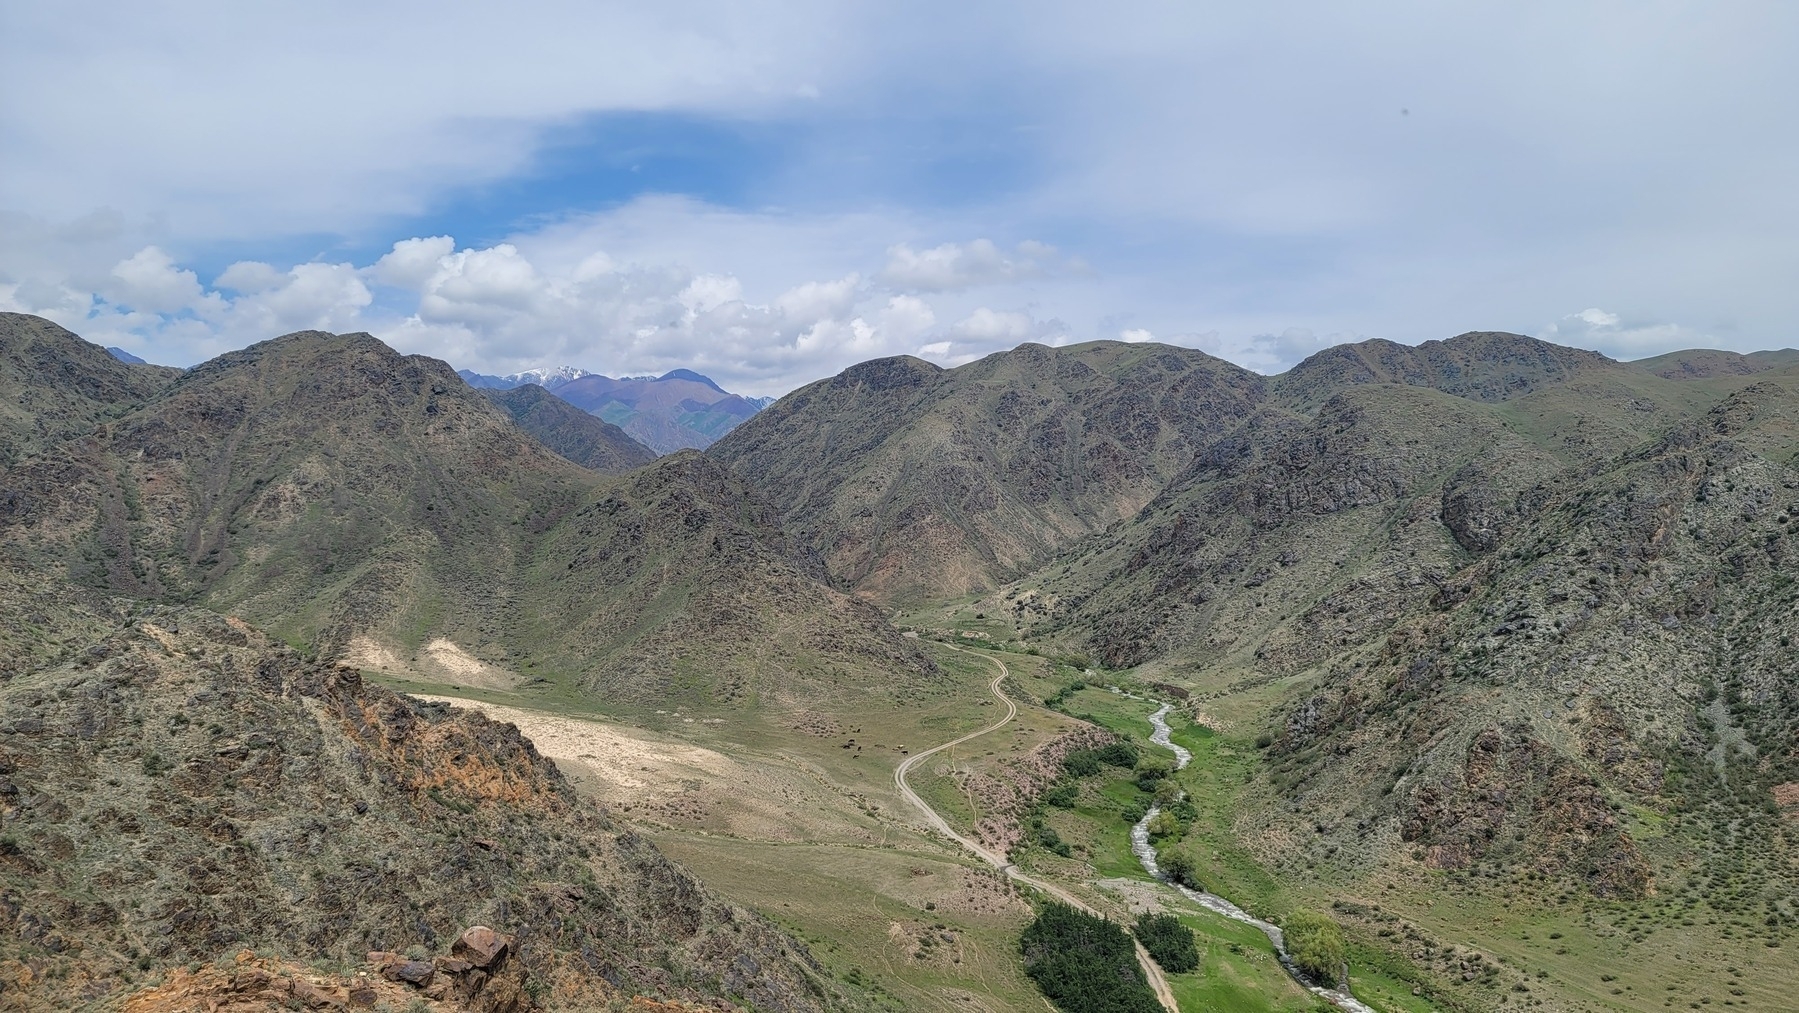 view from the top of a small mountain looking down at a river, dirt car tracks, and other mountains